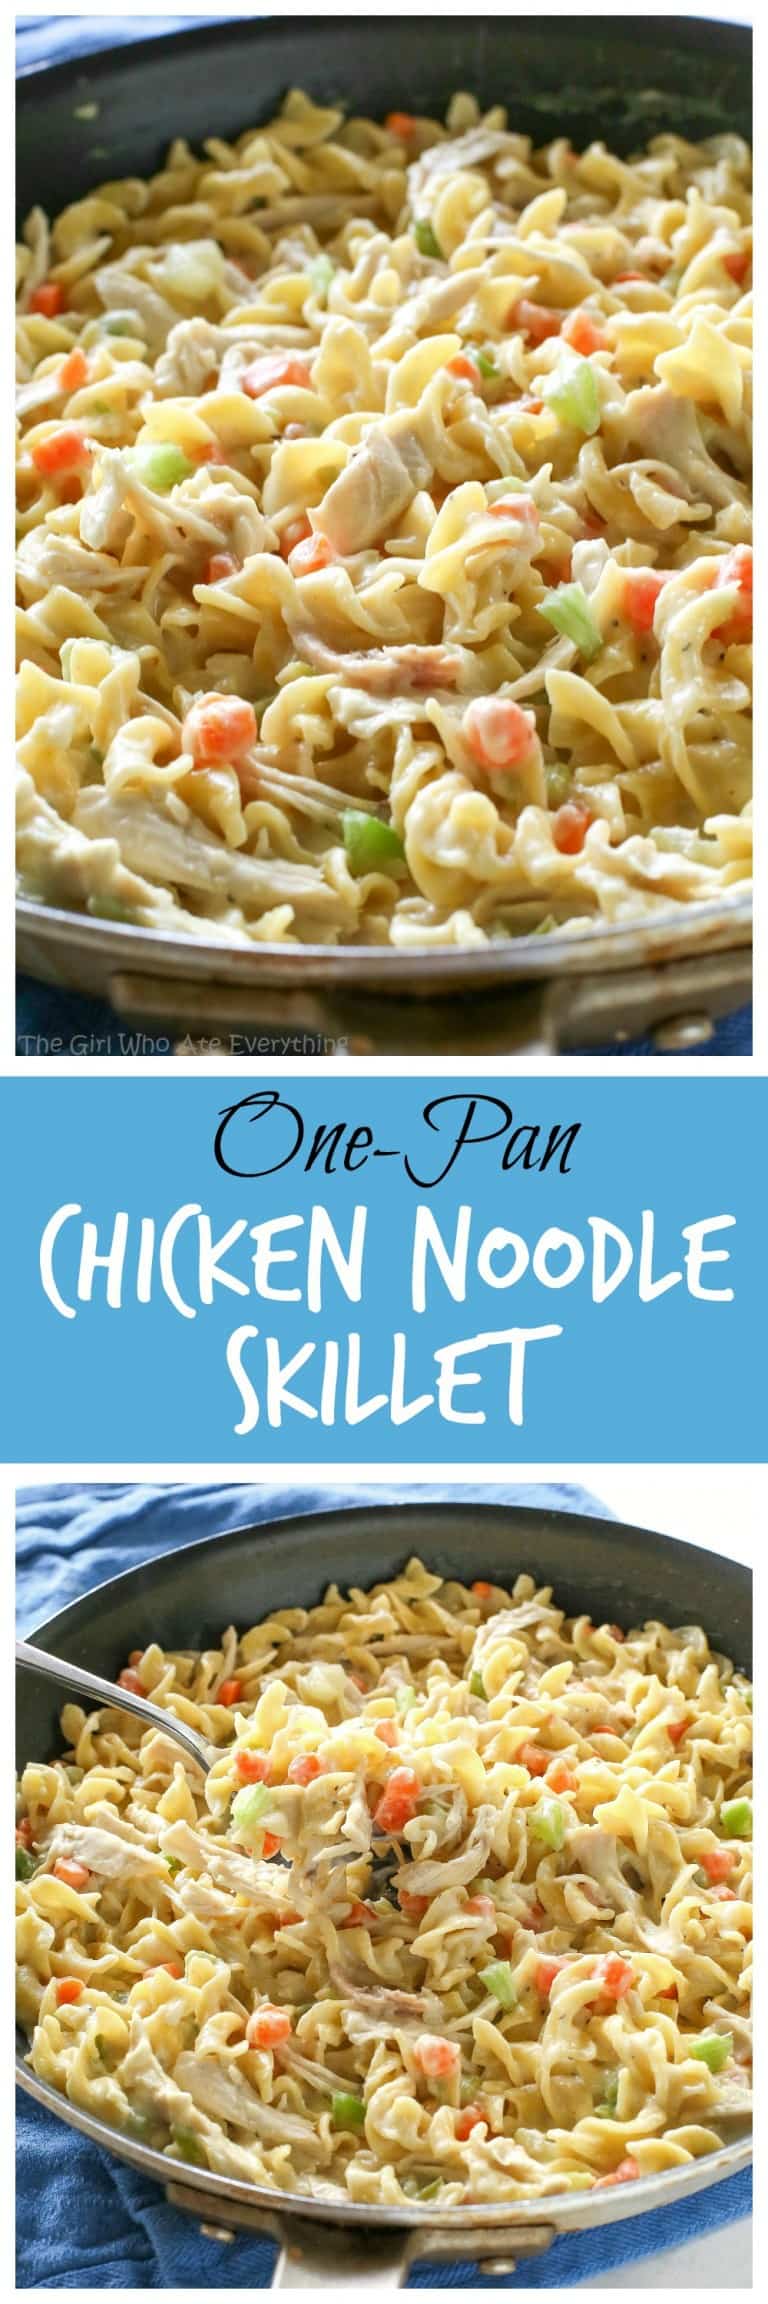 Creamy Chicken Noodle Skillet (+VIDEO) - The Girl Who Ate Everything